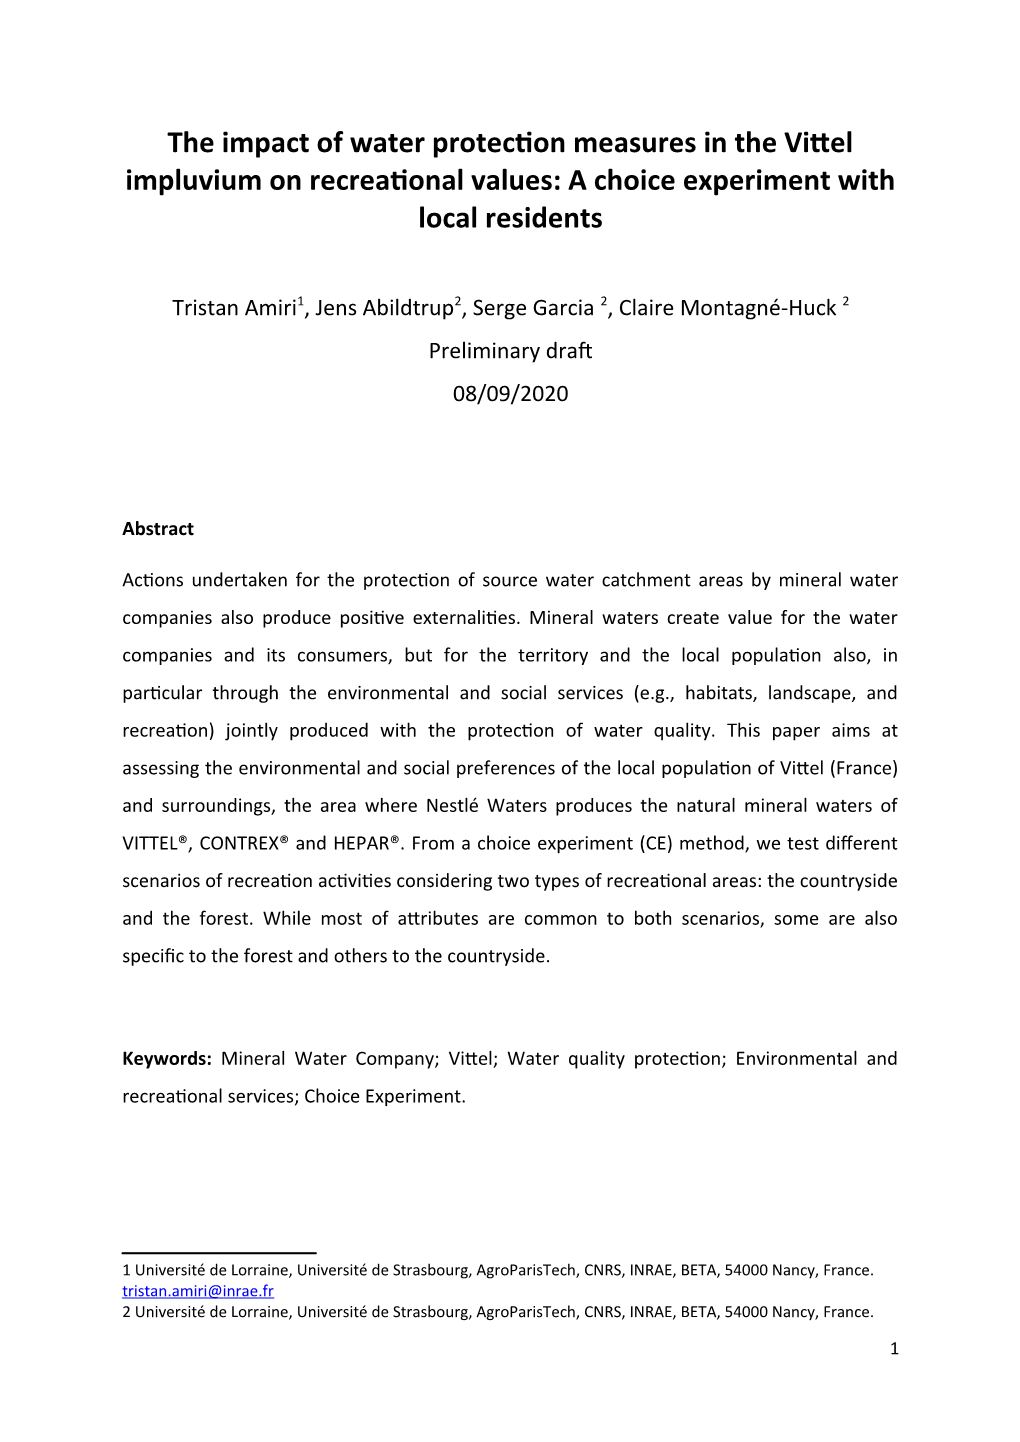 The Impact of Water Protection Measures in the Vittel Impluvium on Recreational Values: a Choice Experiment with Local Residents